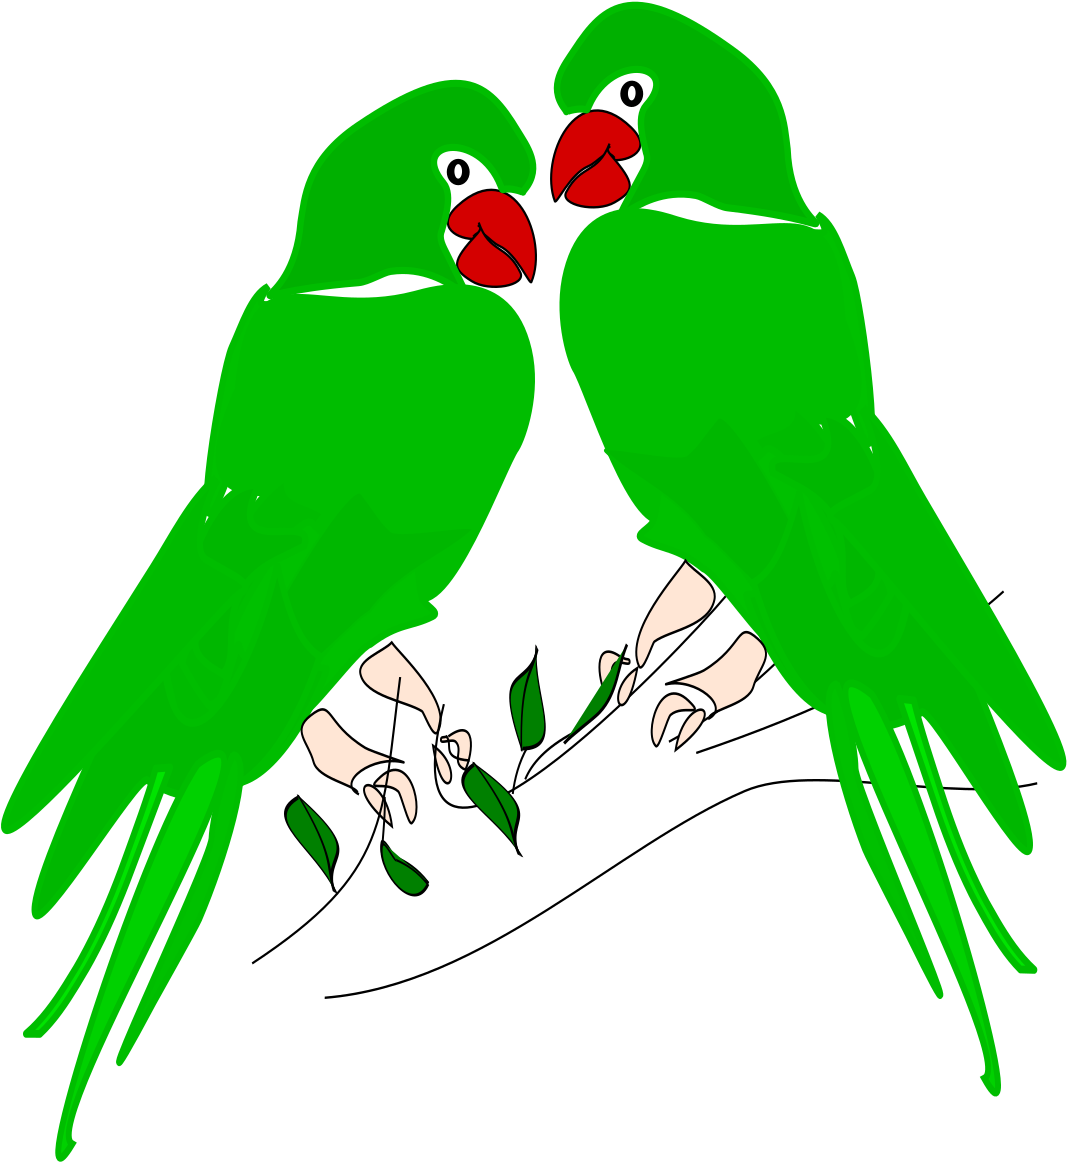 A Pair Of Green Birds With Red Beaks